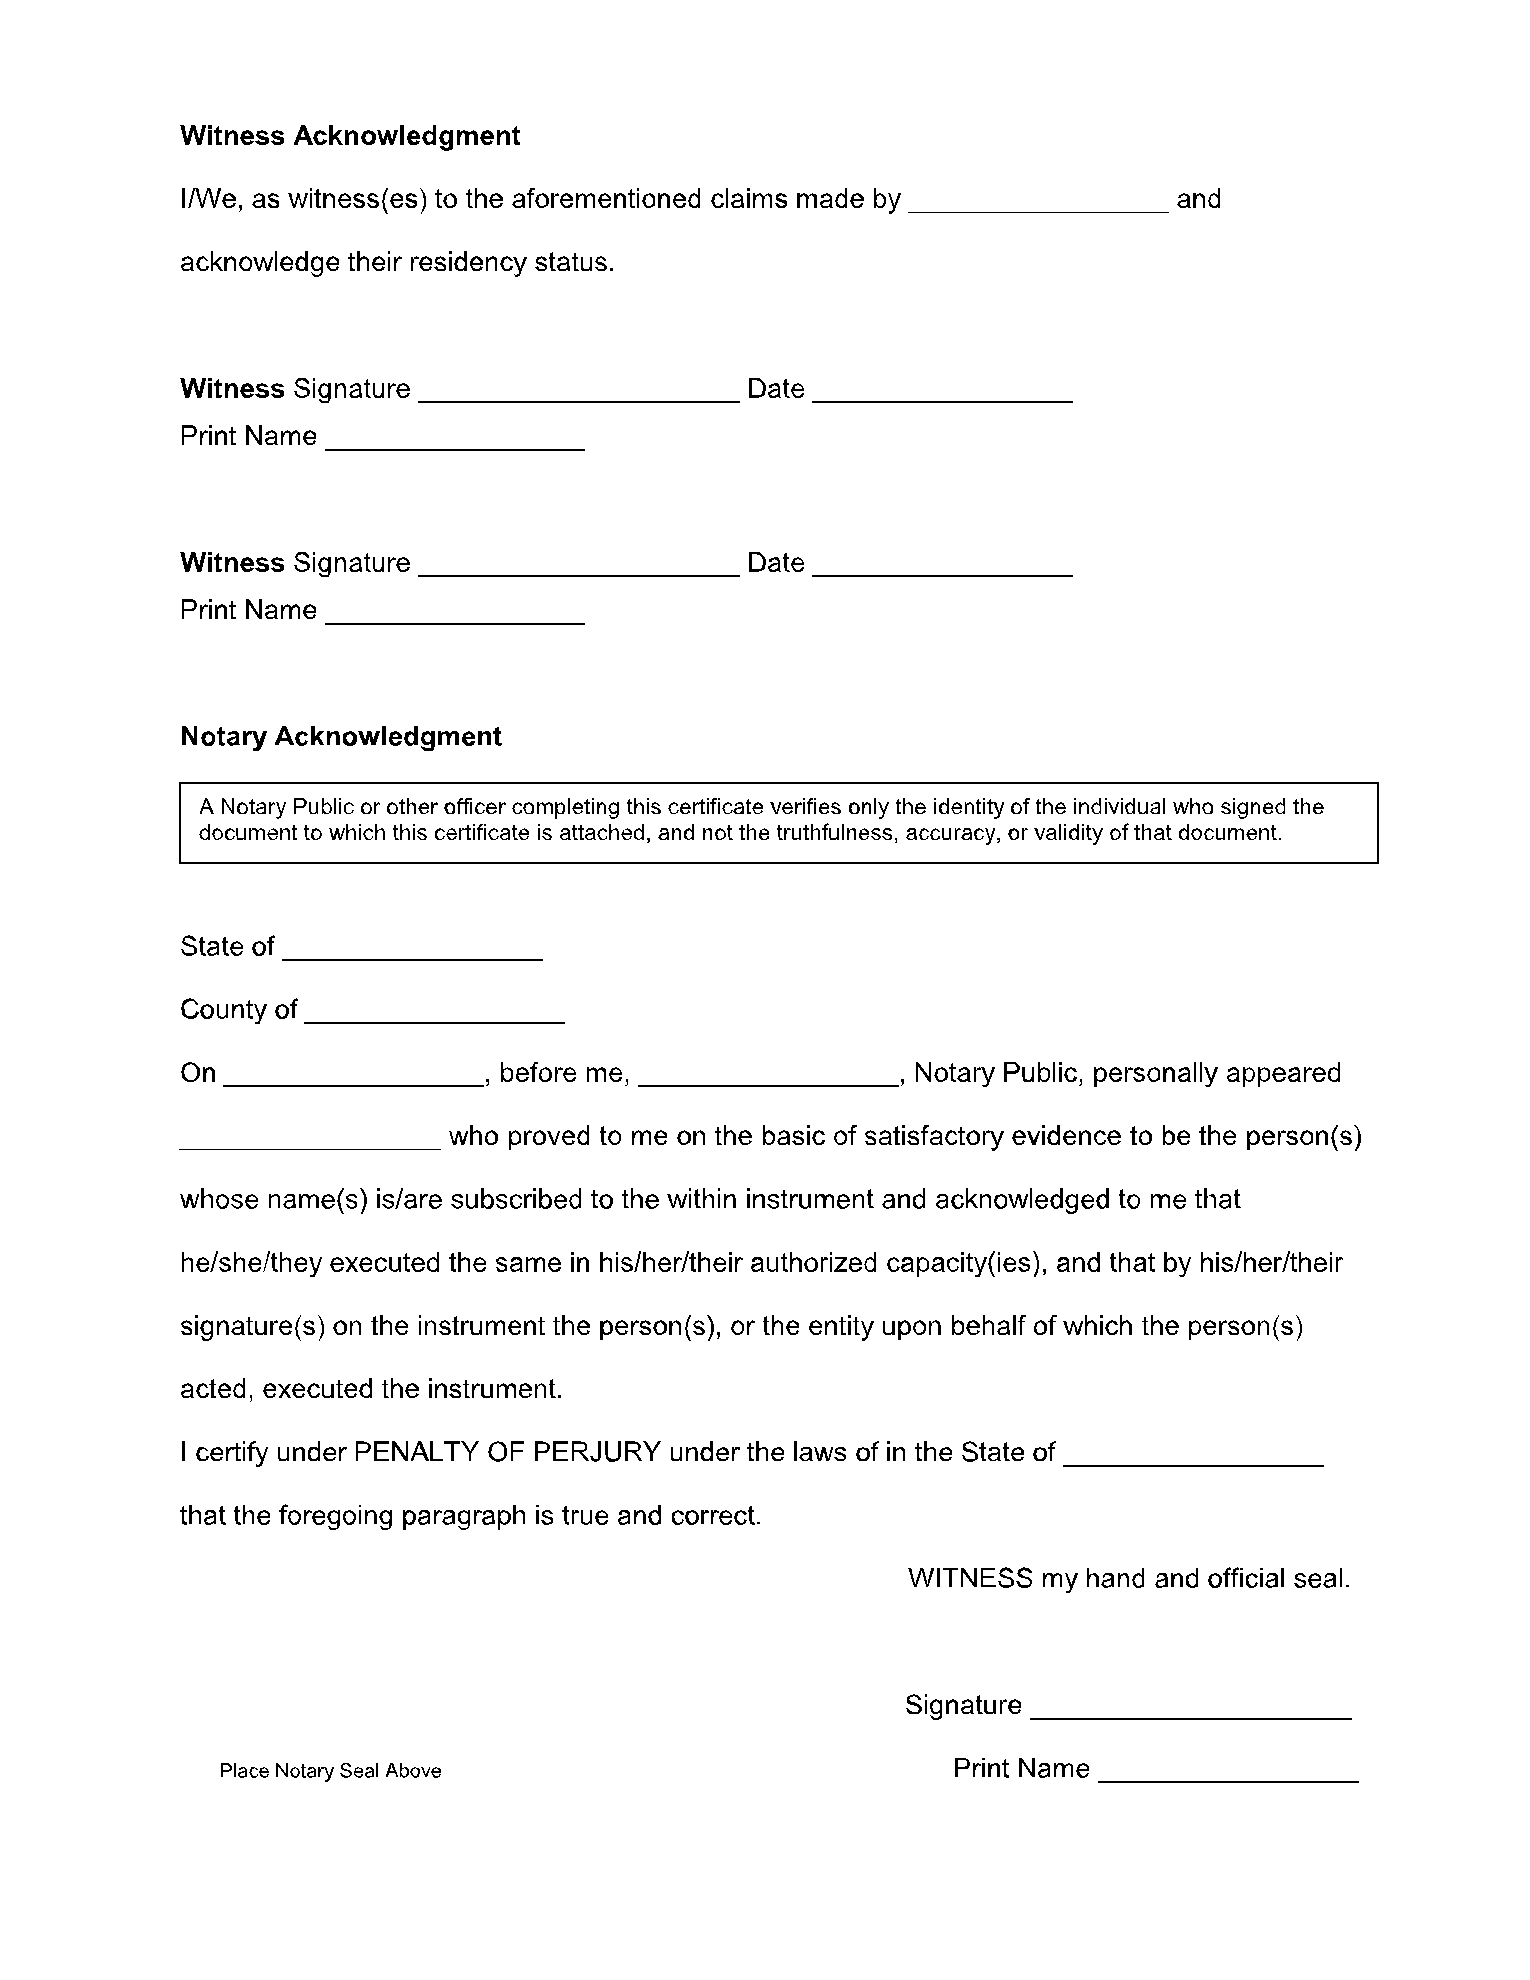 Proof of Residency Letter from Employer 2